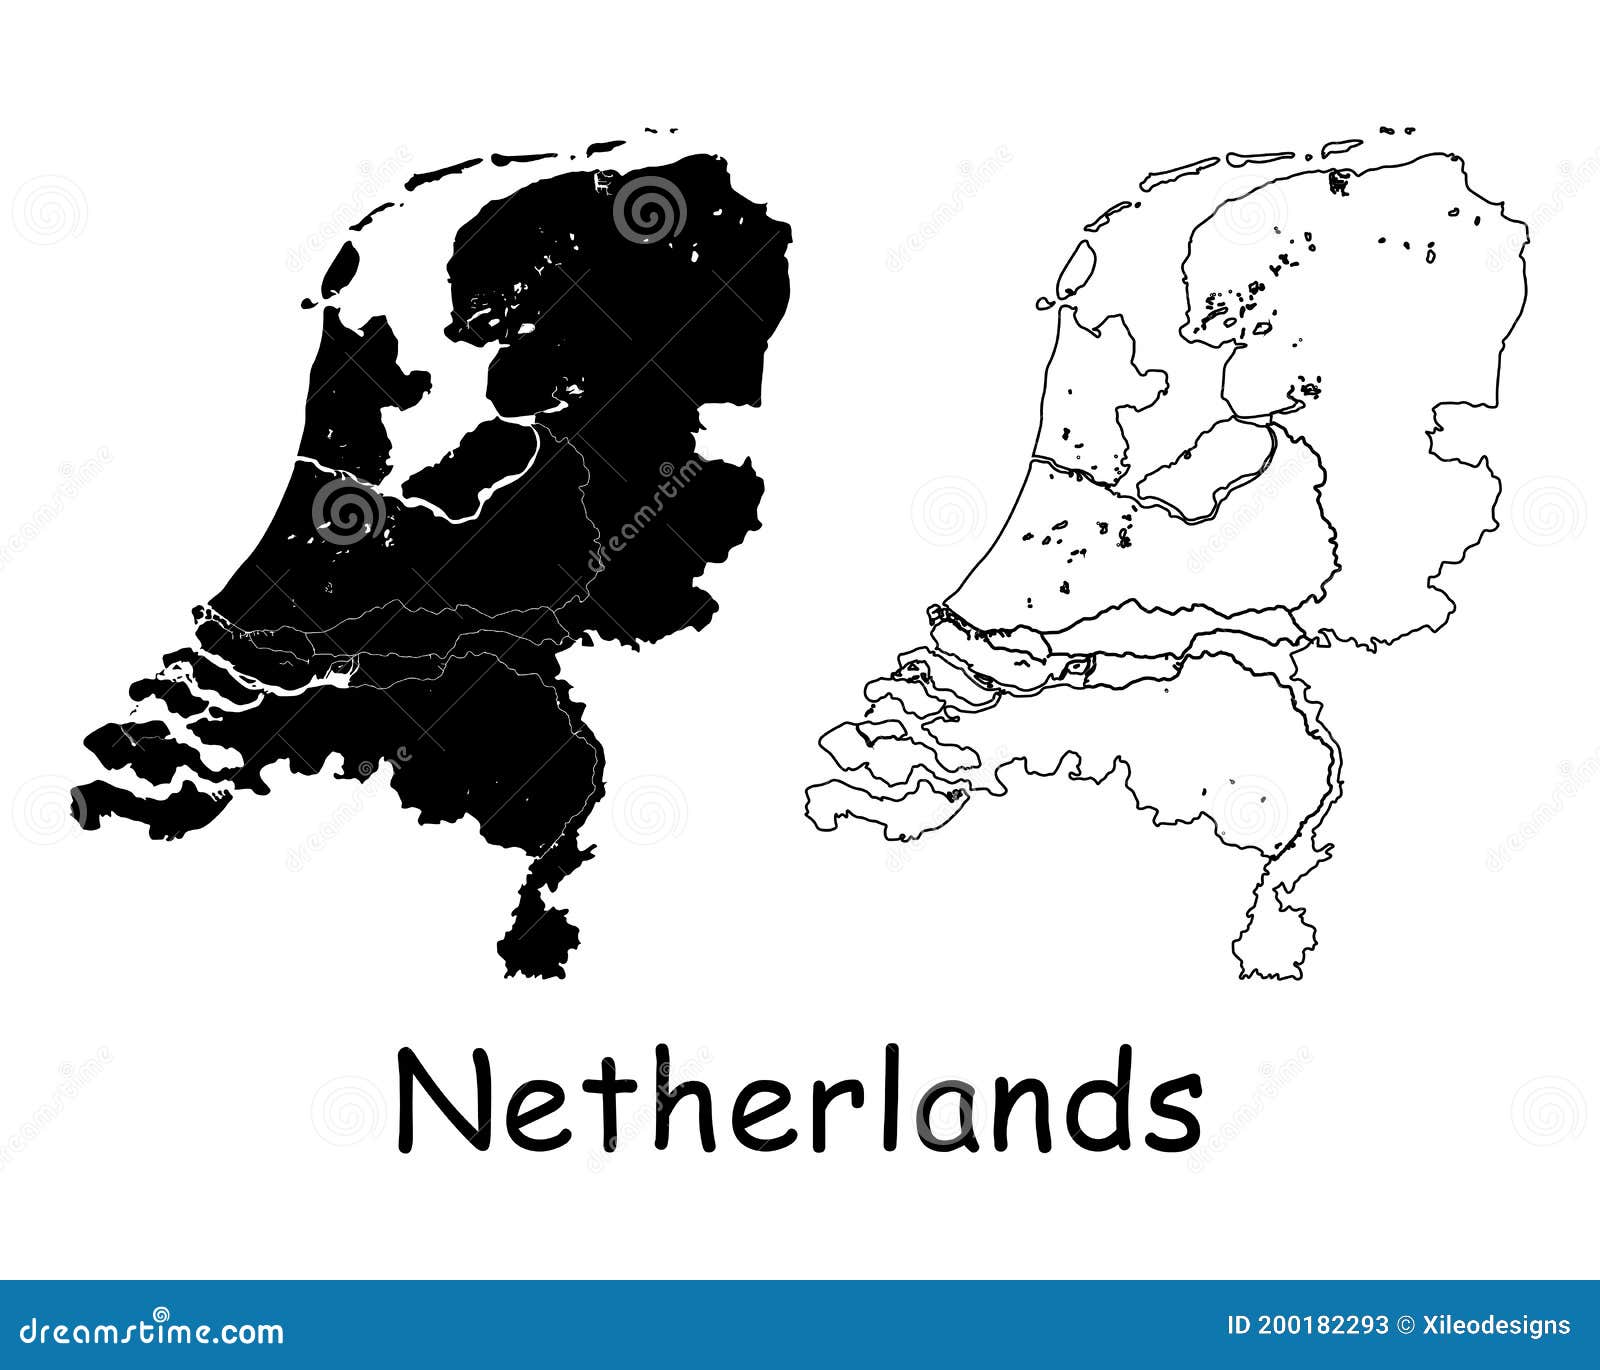 Netherlands Country Map. Black Silhouette and Outline Isolated on White